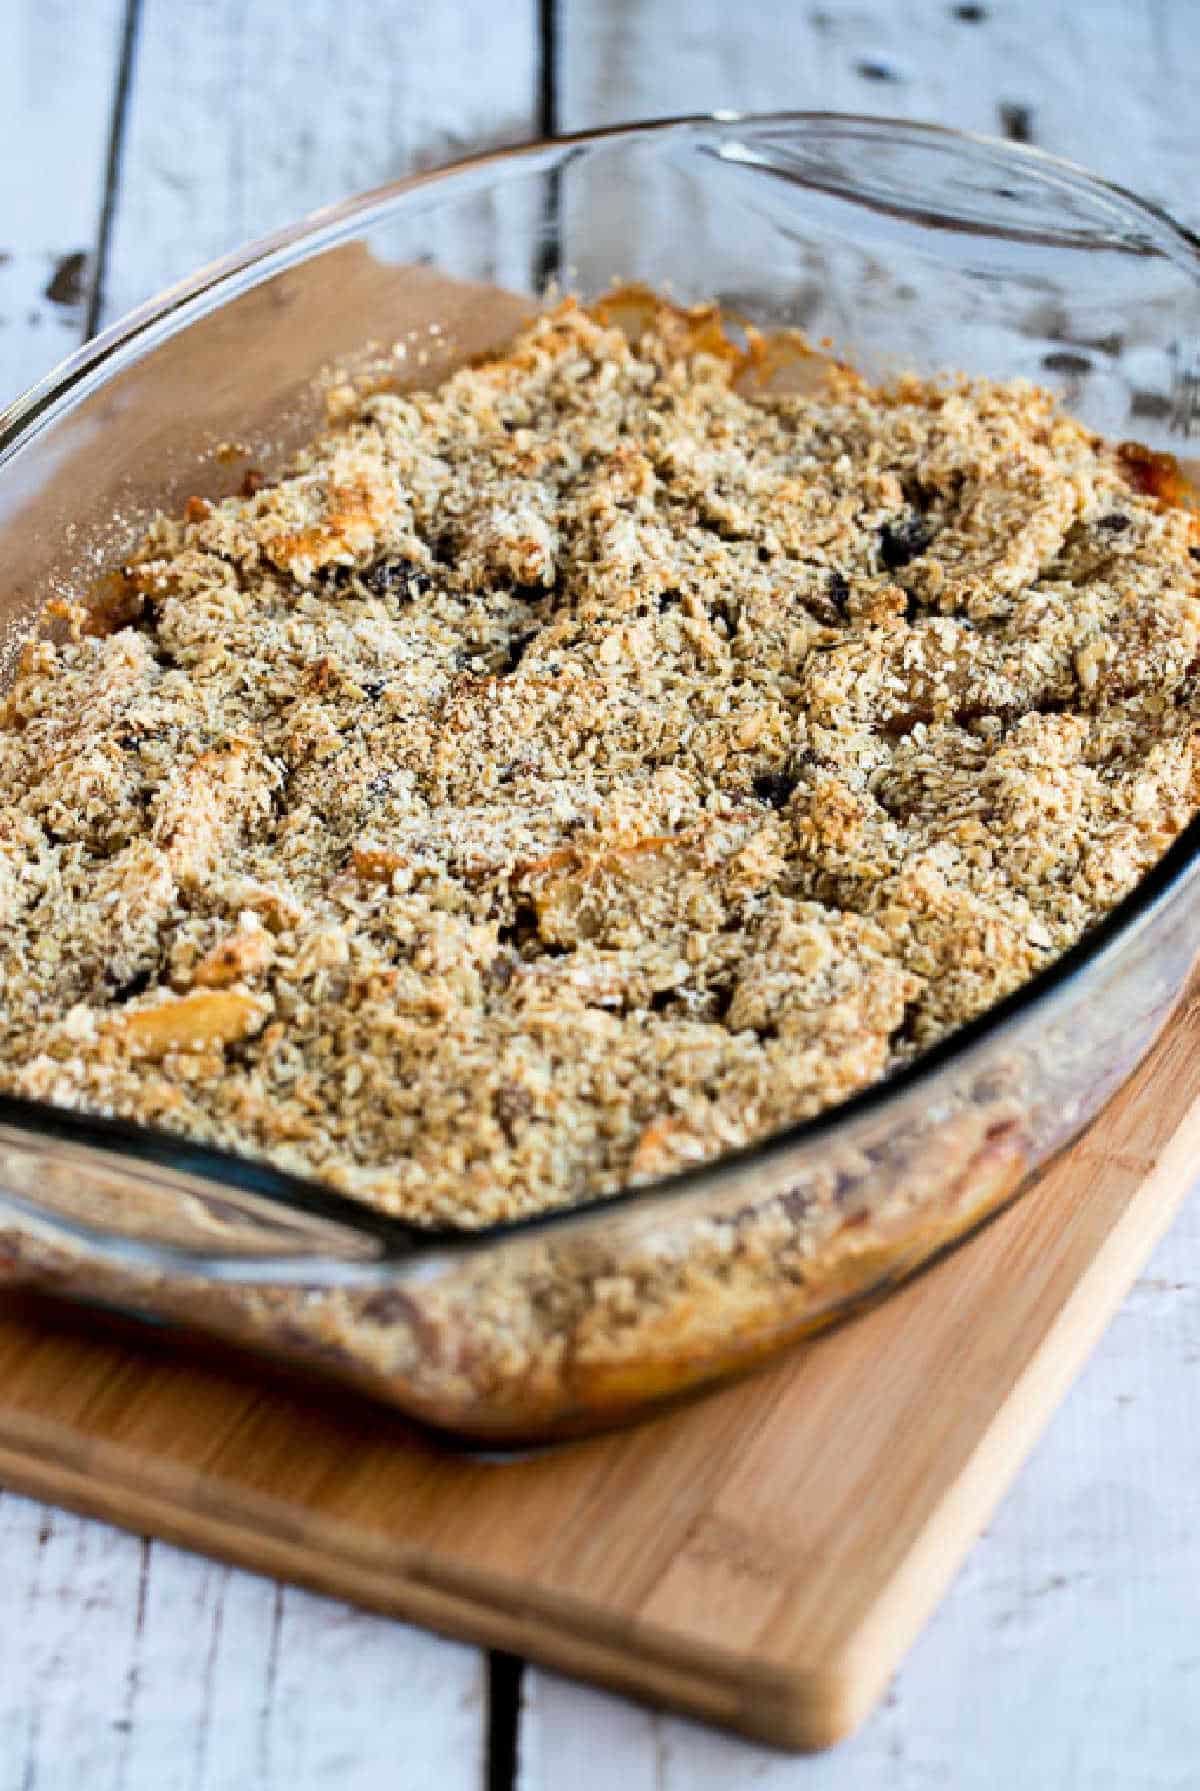 Cranberry Apple Crumble shown in baking dish on cutting board